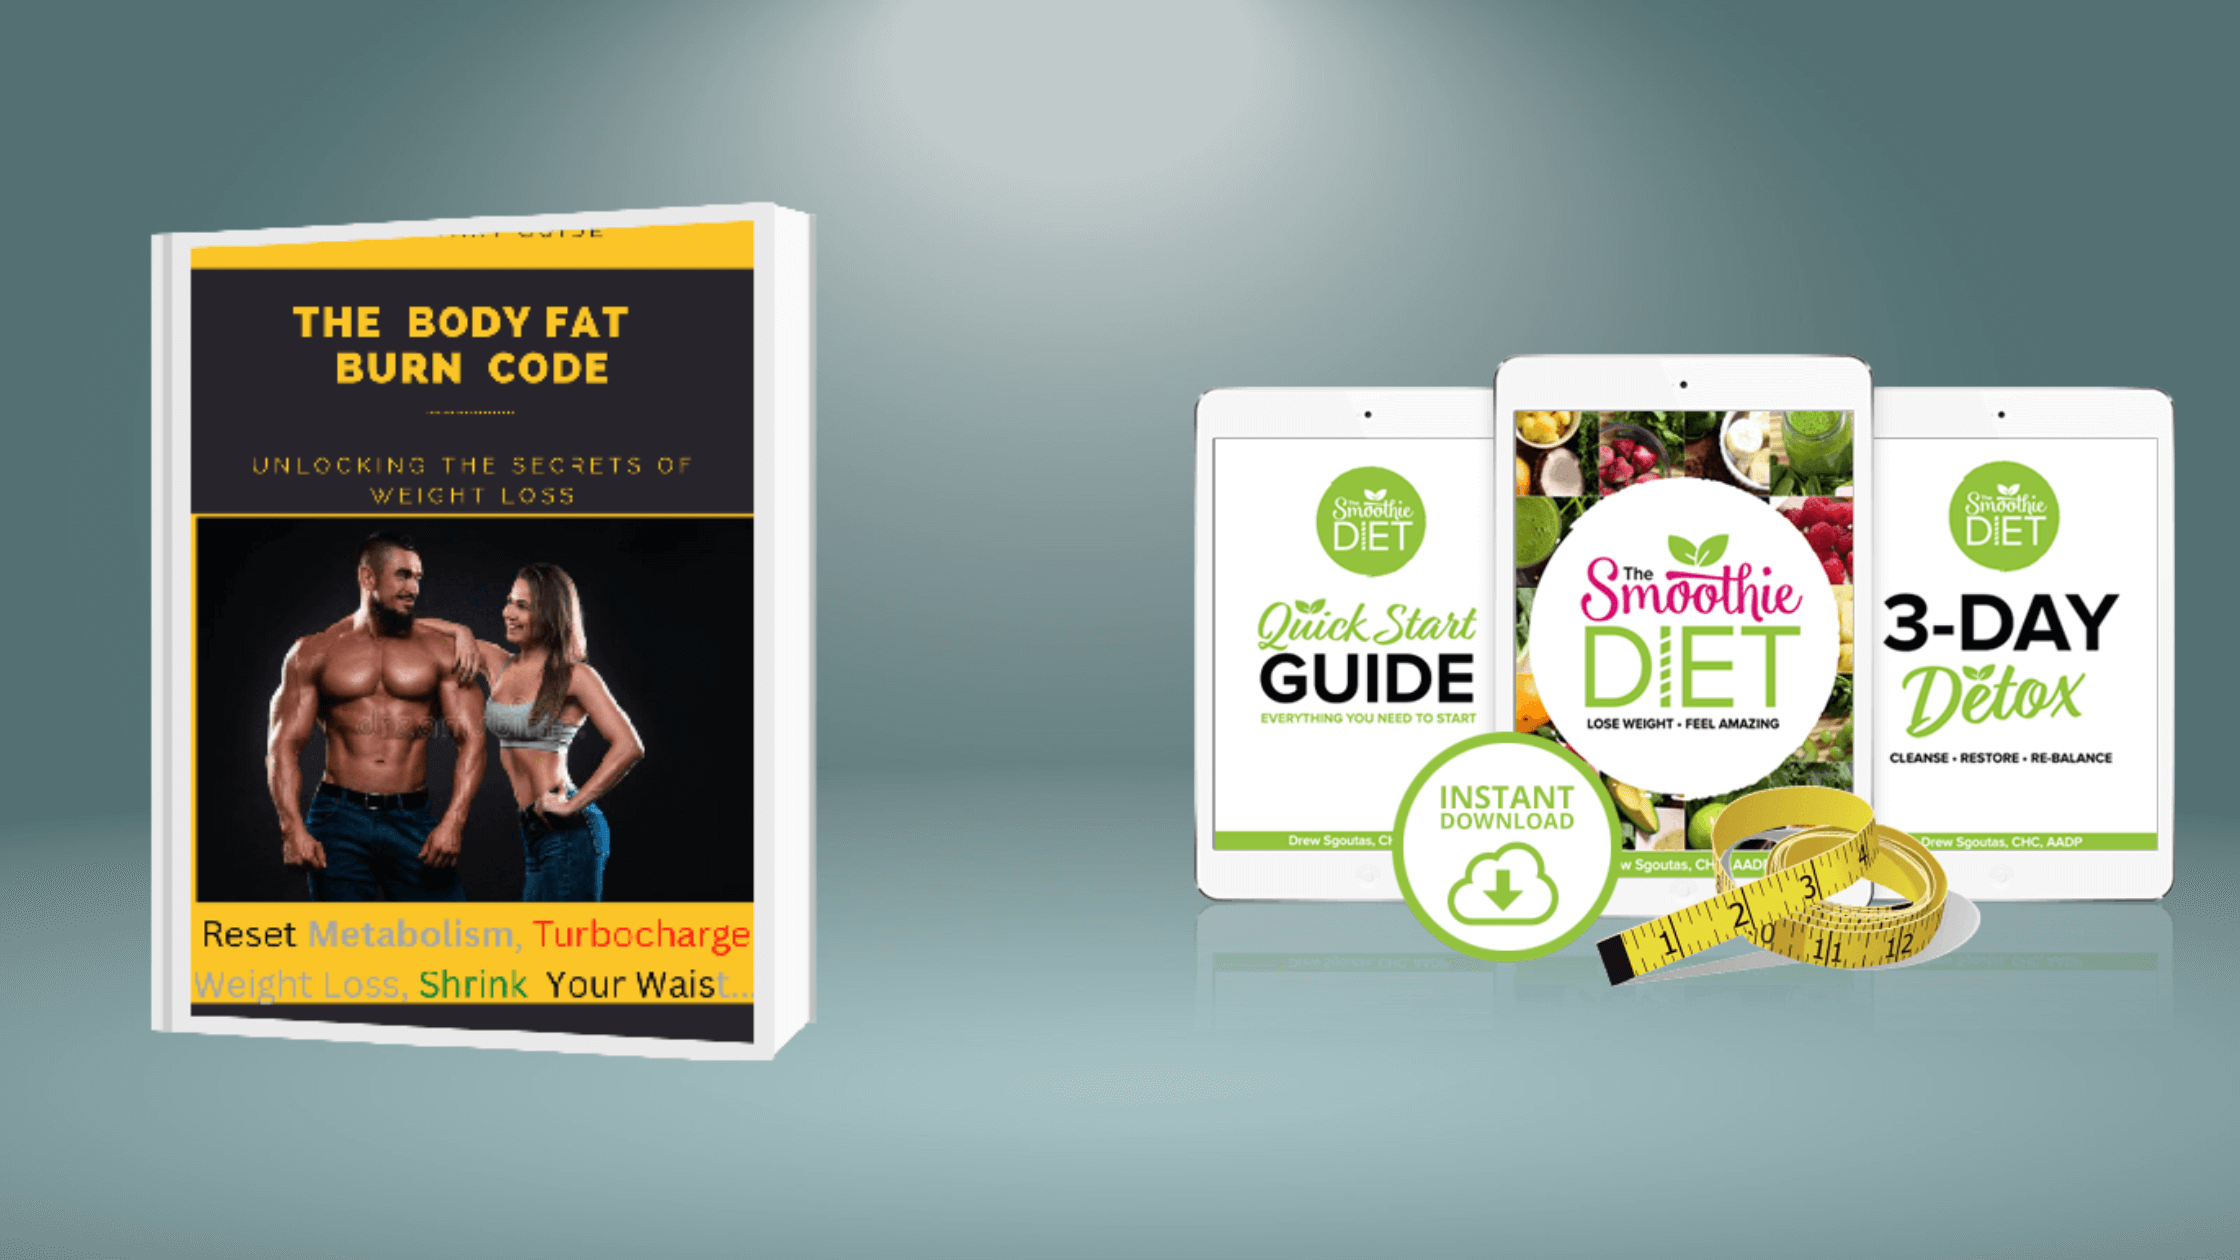 Comparison Of The Fat Burn Code With The Smoothie Diet